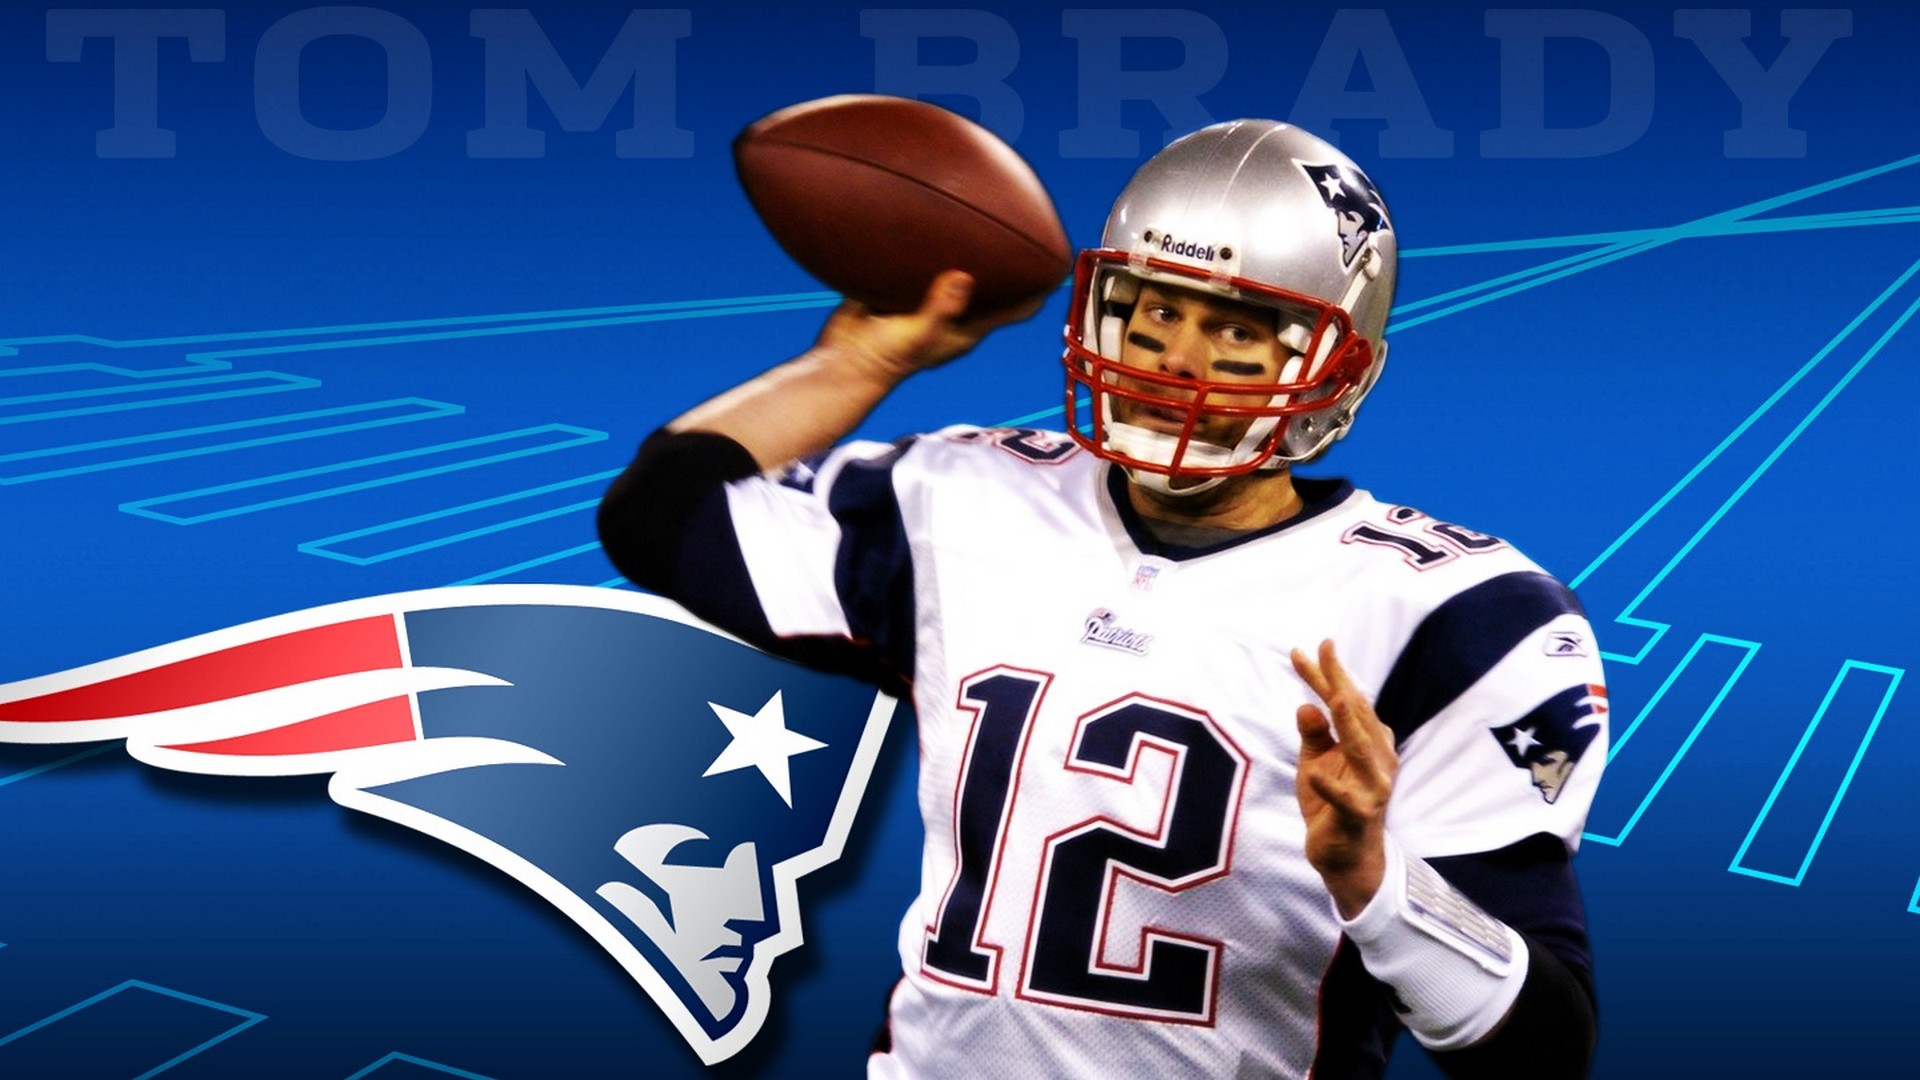 Wallpapers Computer Tom Brady with image resolution 1920x1080 pixel. You can make this wallpaper for your Desktop Computer Backgrounds, Mac Wallpapers, Android Lock screen or iPhone Screensavers